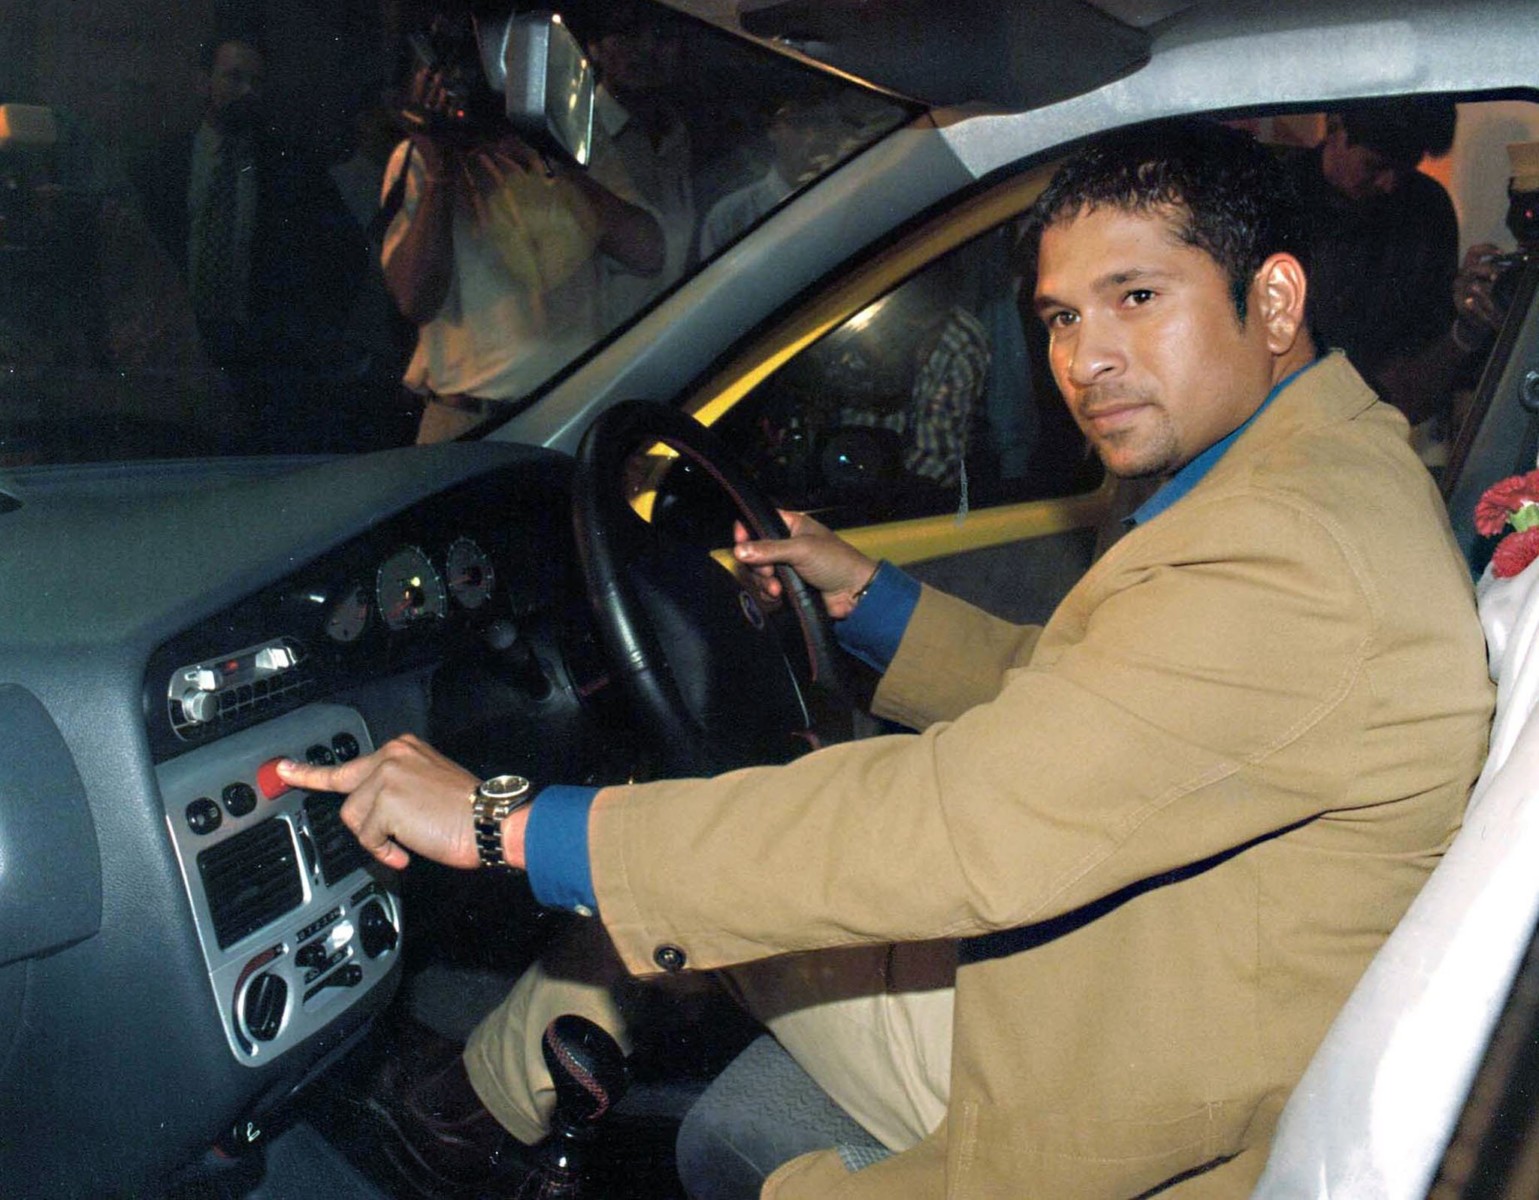 , Cricket legend Sachin Tendulkar still owns his first car bought for £1,200 in 1989, and parks it with his £155k Ferrari